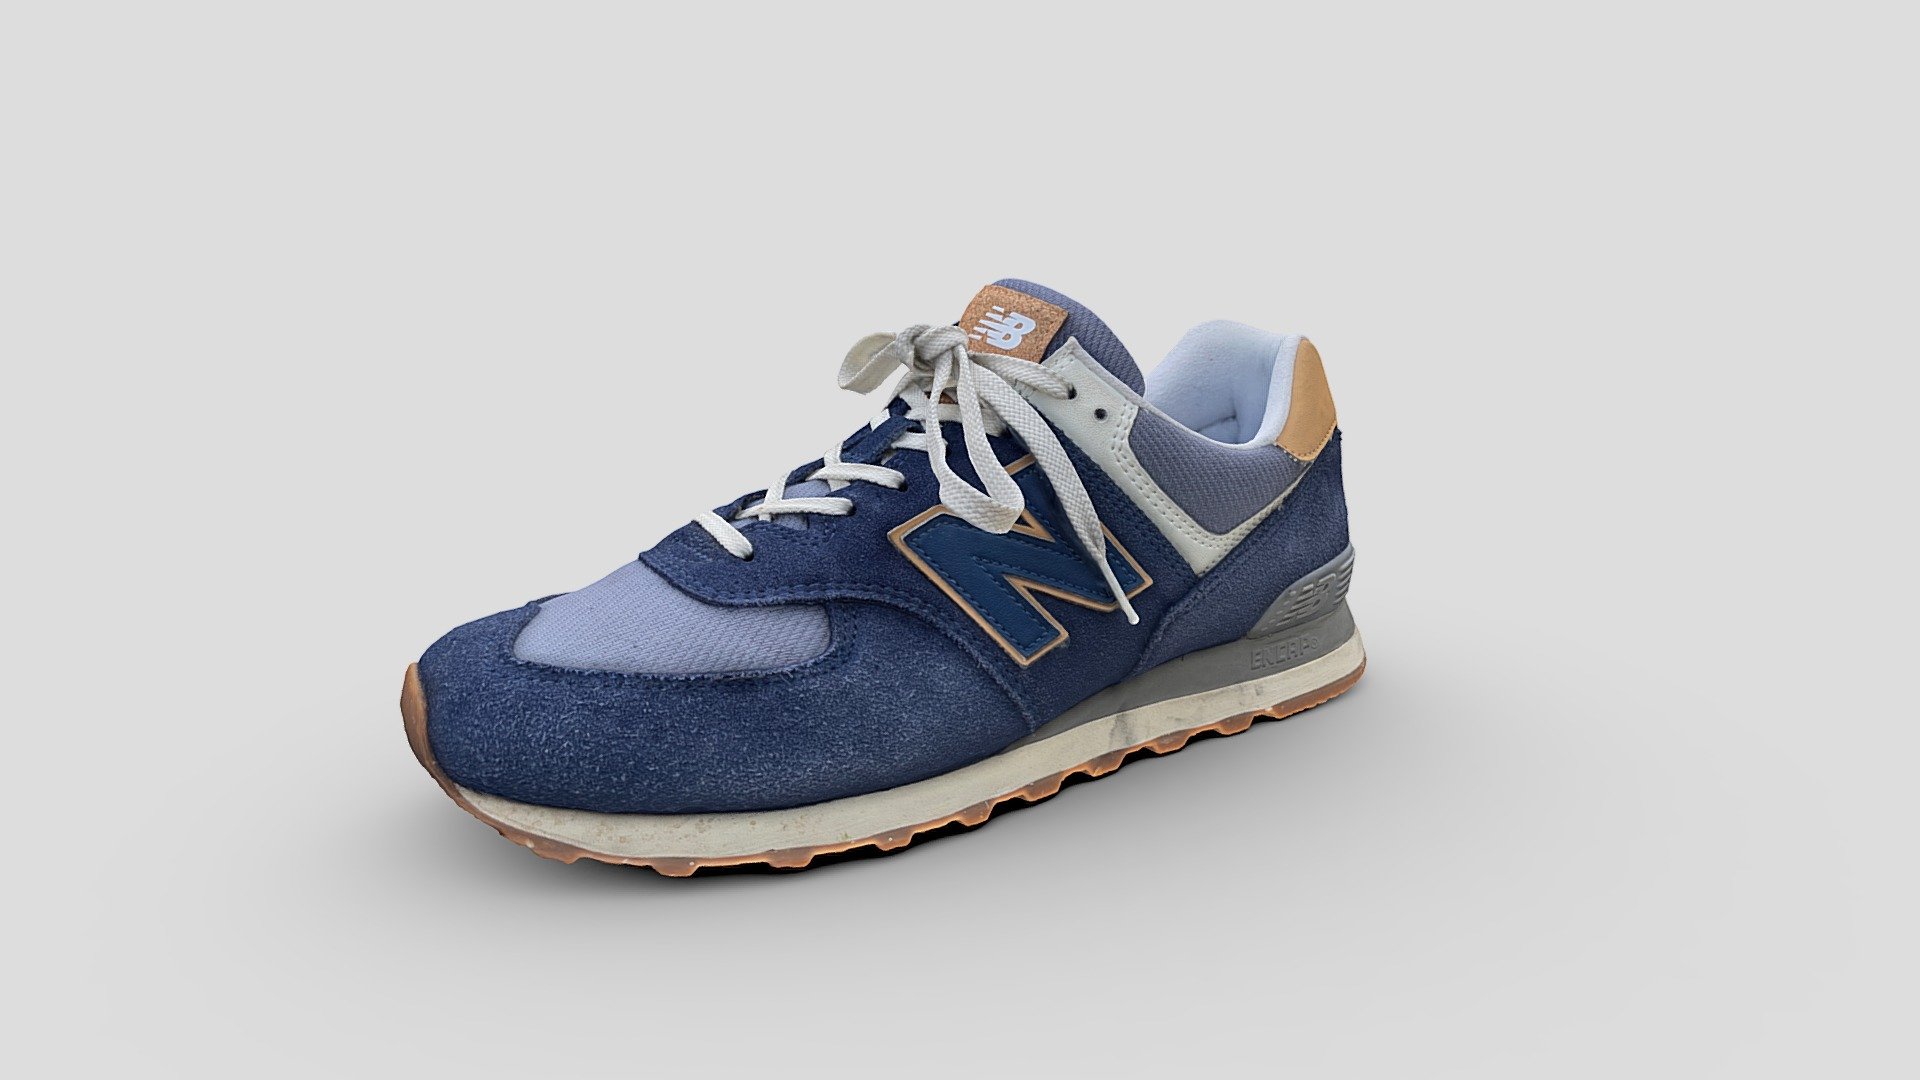 185 photos captured and processed with RealityScan, pretty happy with the result! Much better than my first attempt at capturing the same shoe 10 months ago when the app was released: https://skfb.ly/o9n7L - New Balance 574 captured with RealityScan - 3D model by alban 3d model